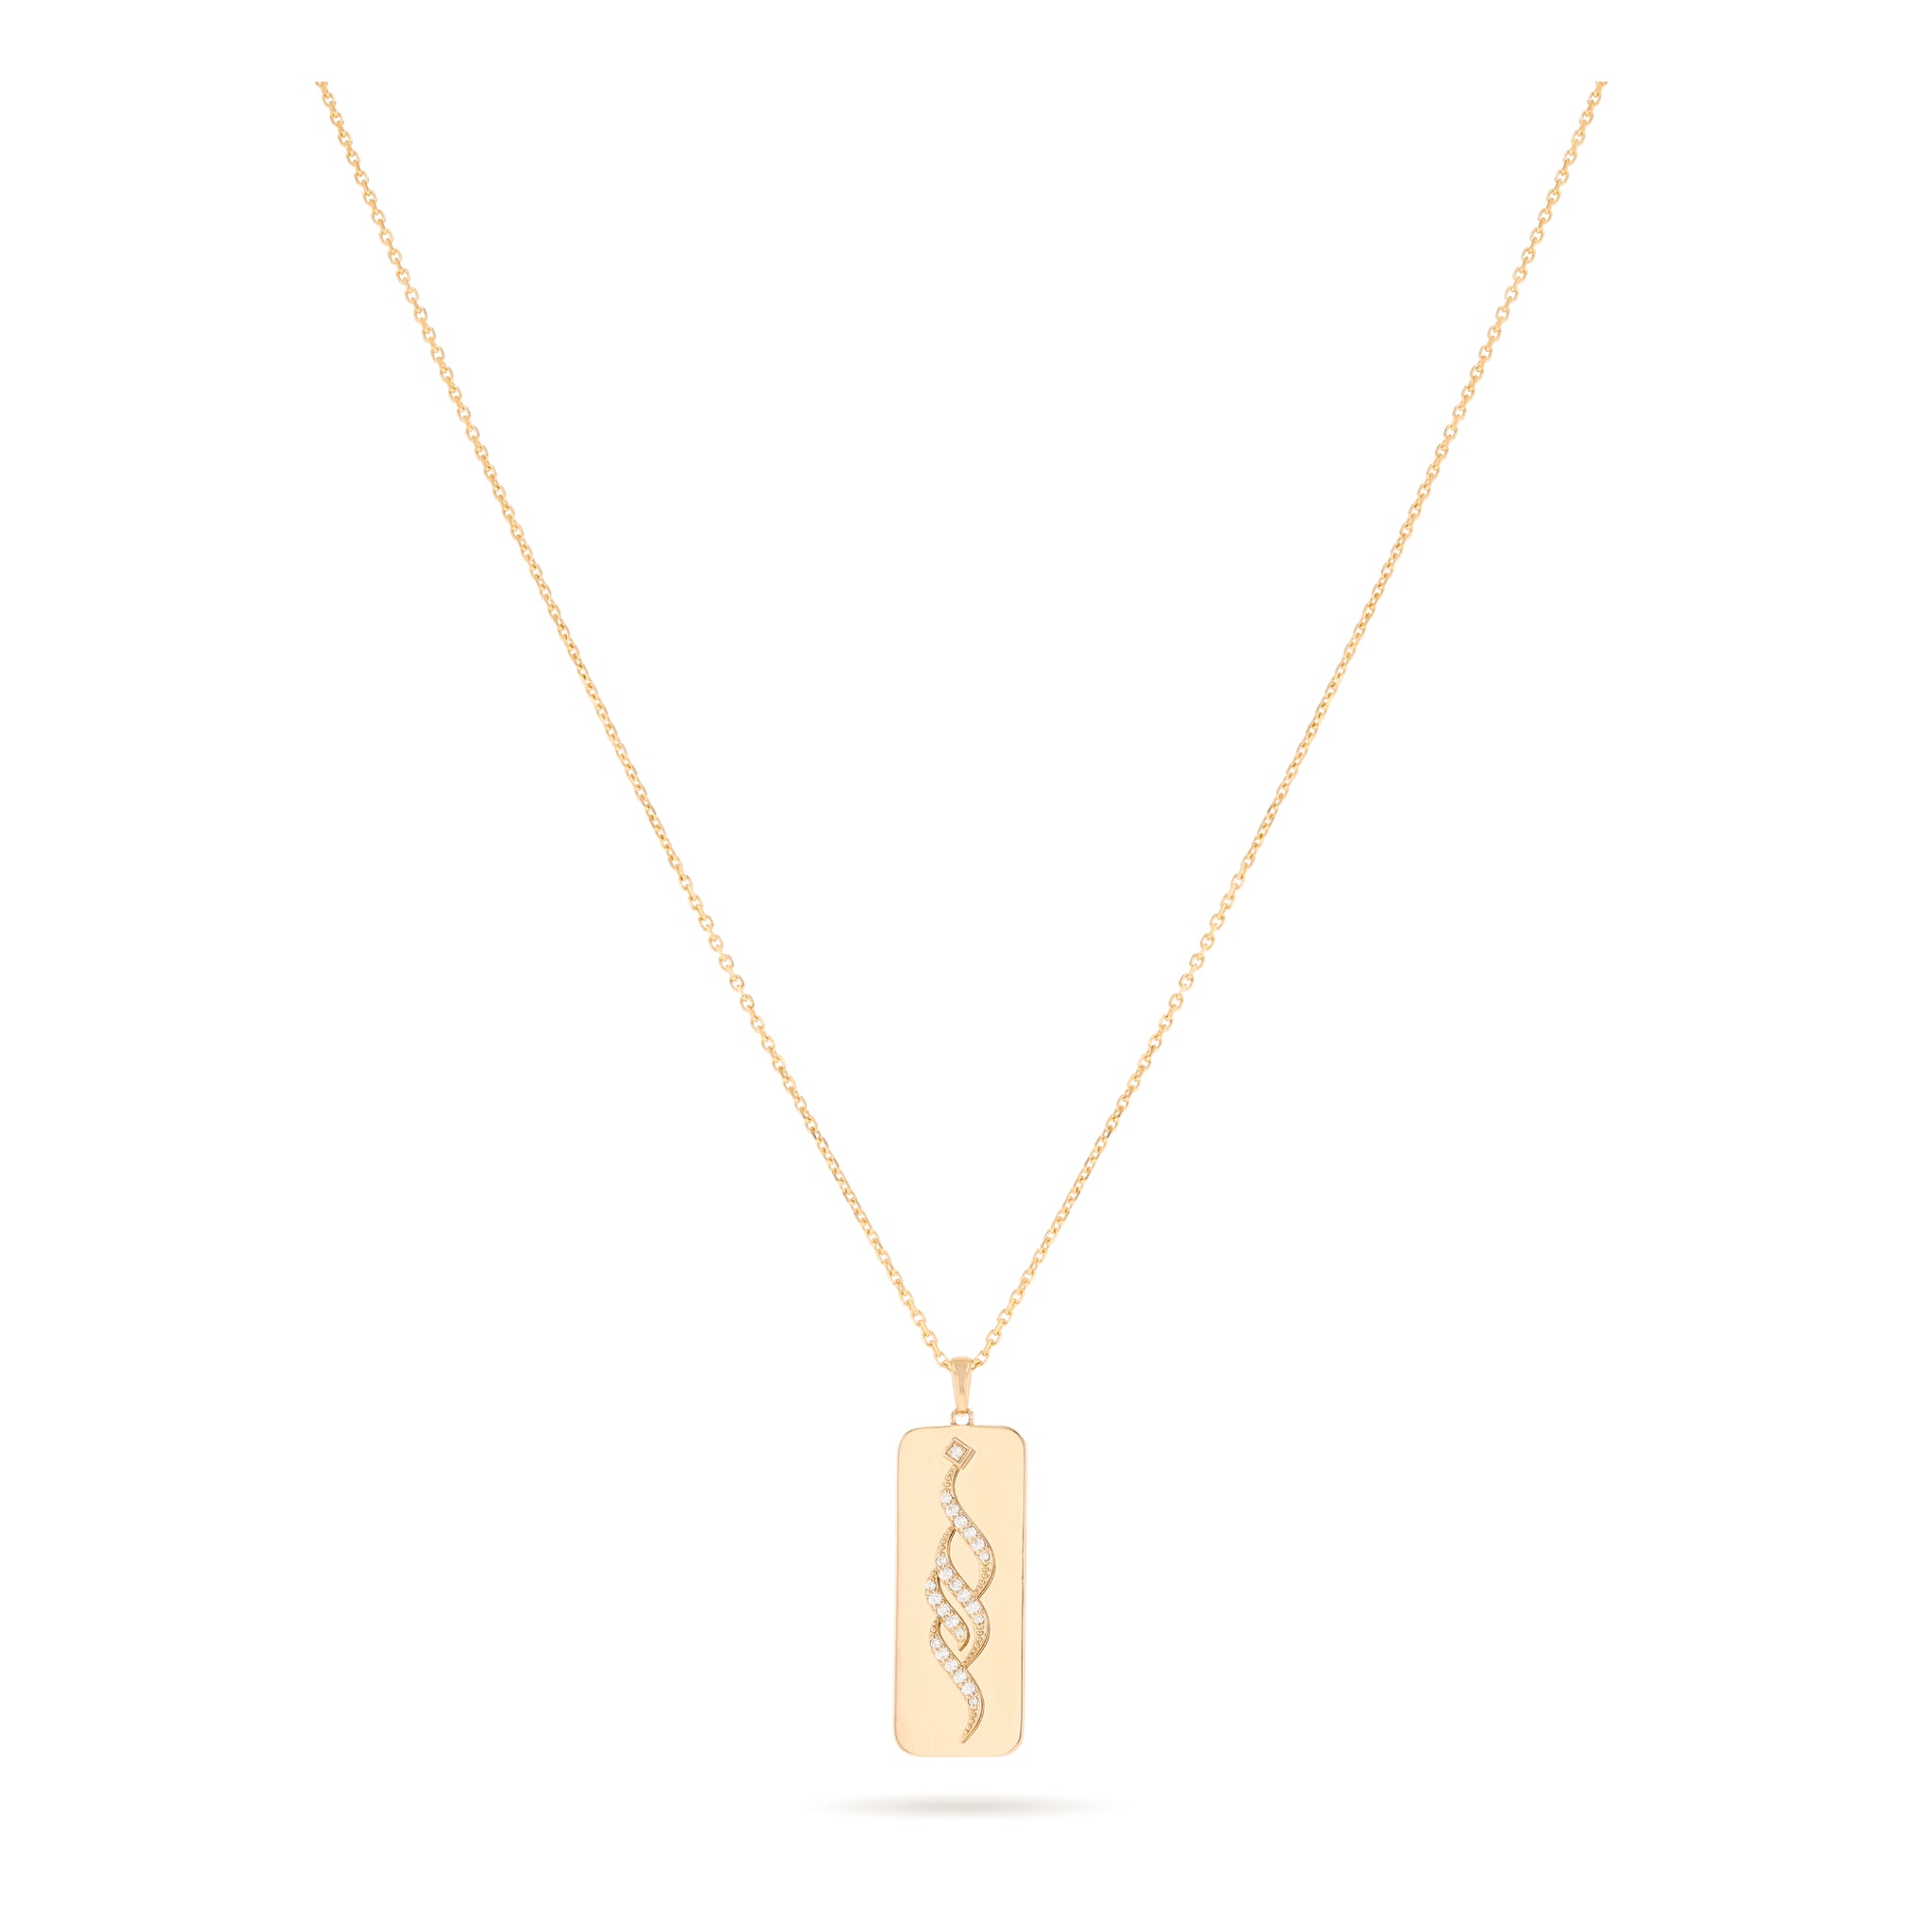 Light up my Life "Noor" Necklace